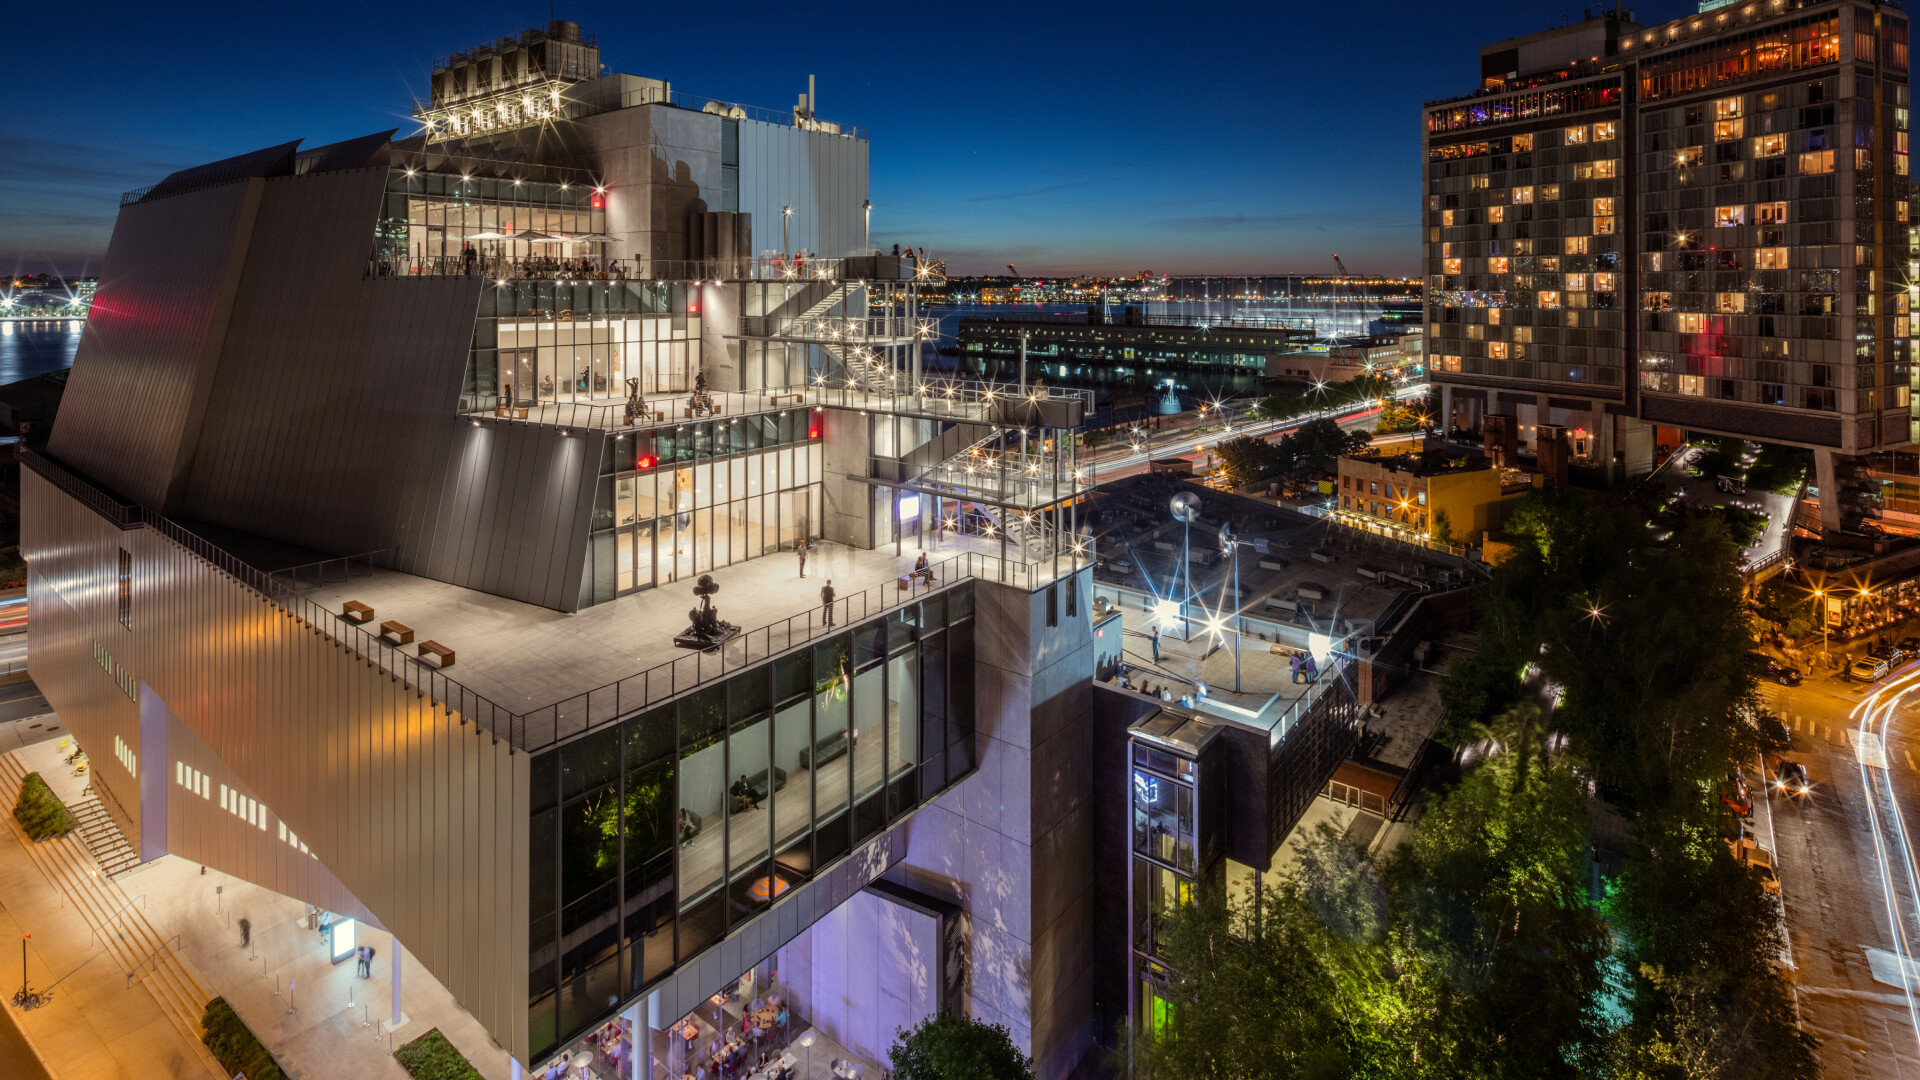 A photograph of the Whitney Museum of American Art by Ben Gancsos, dated 2016.